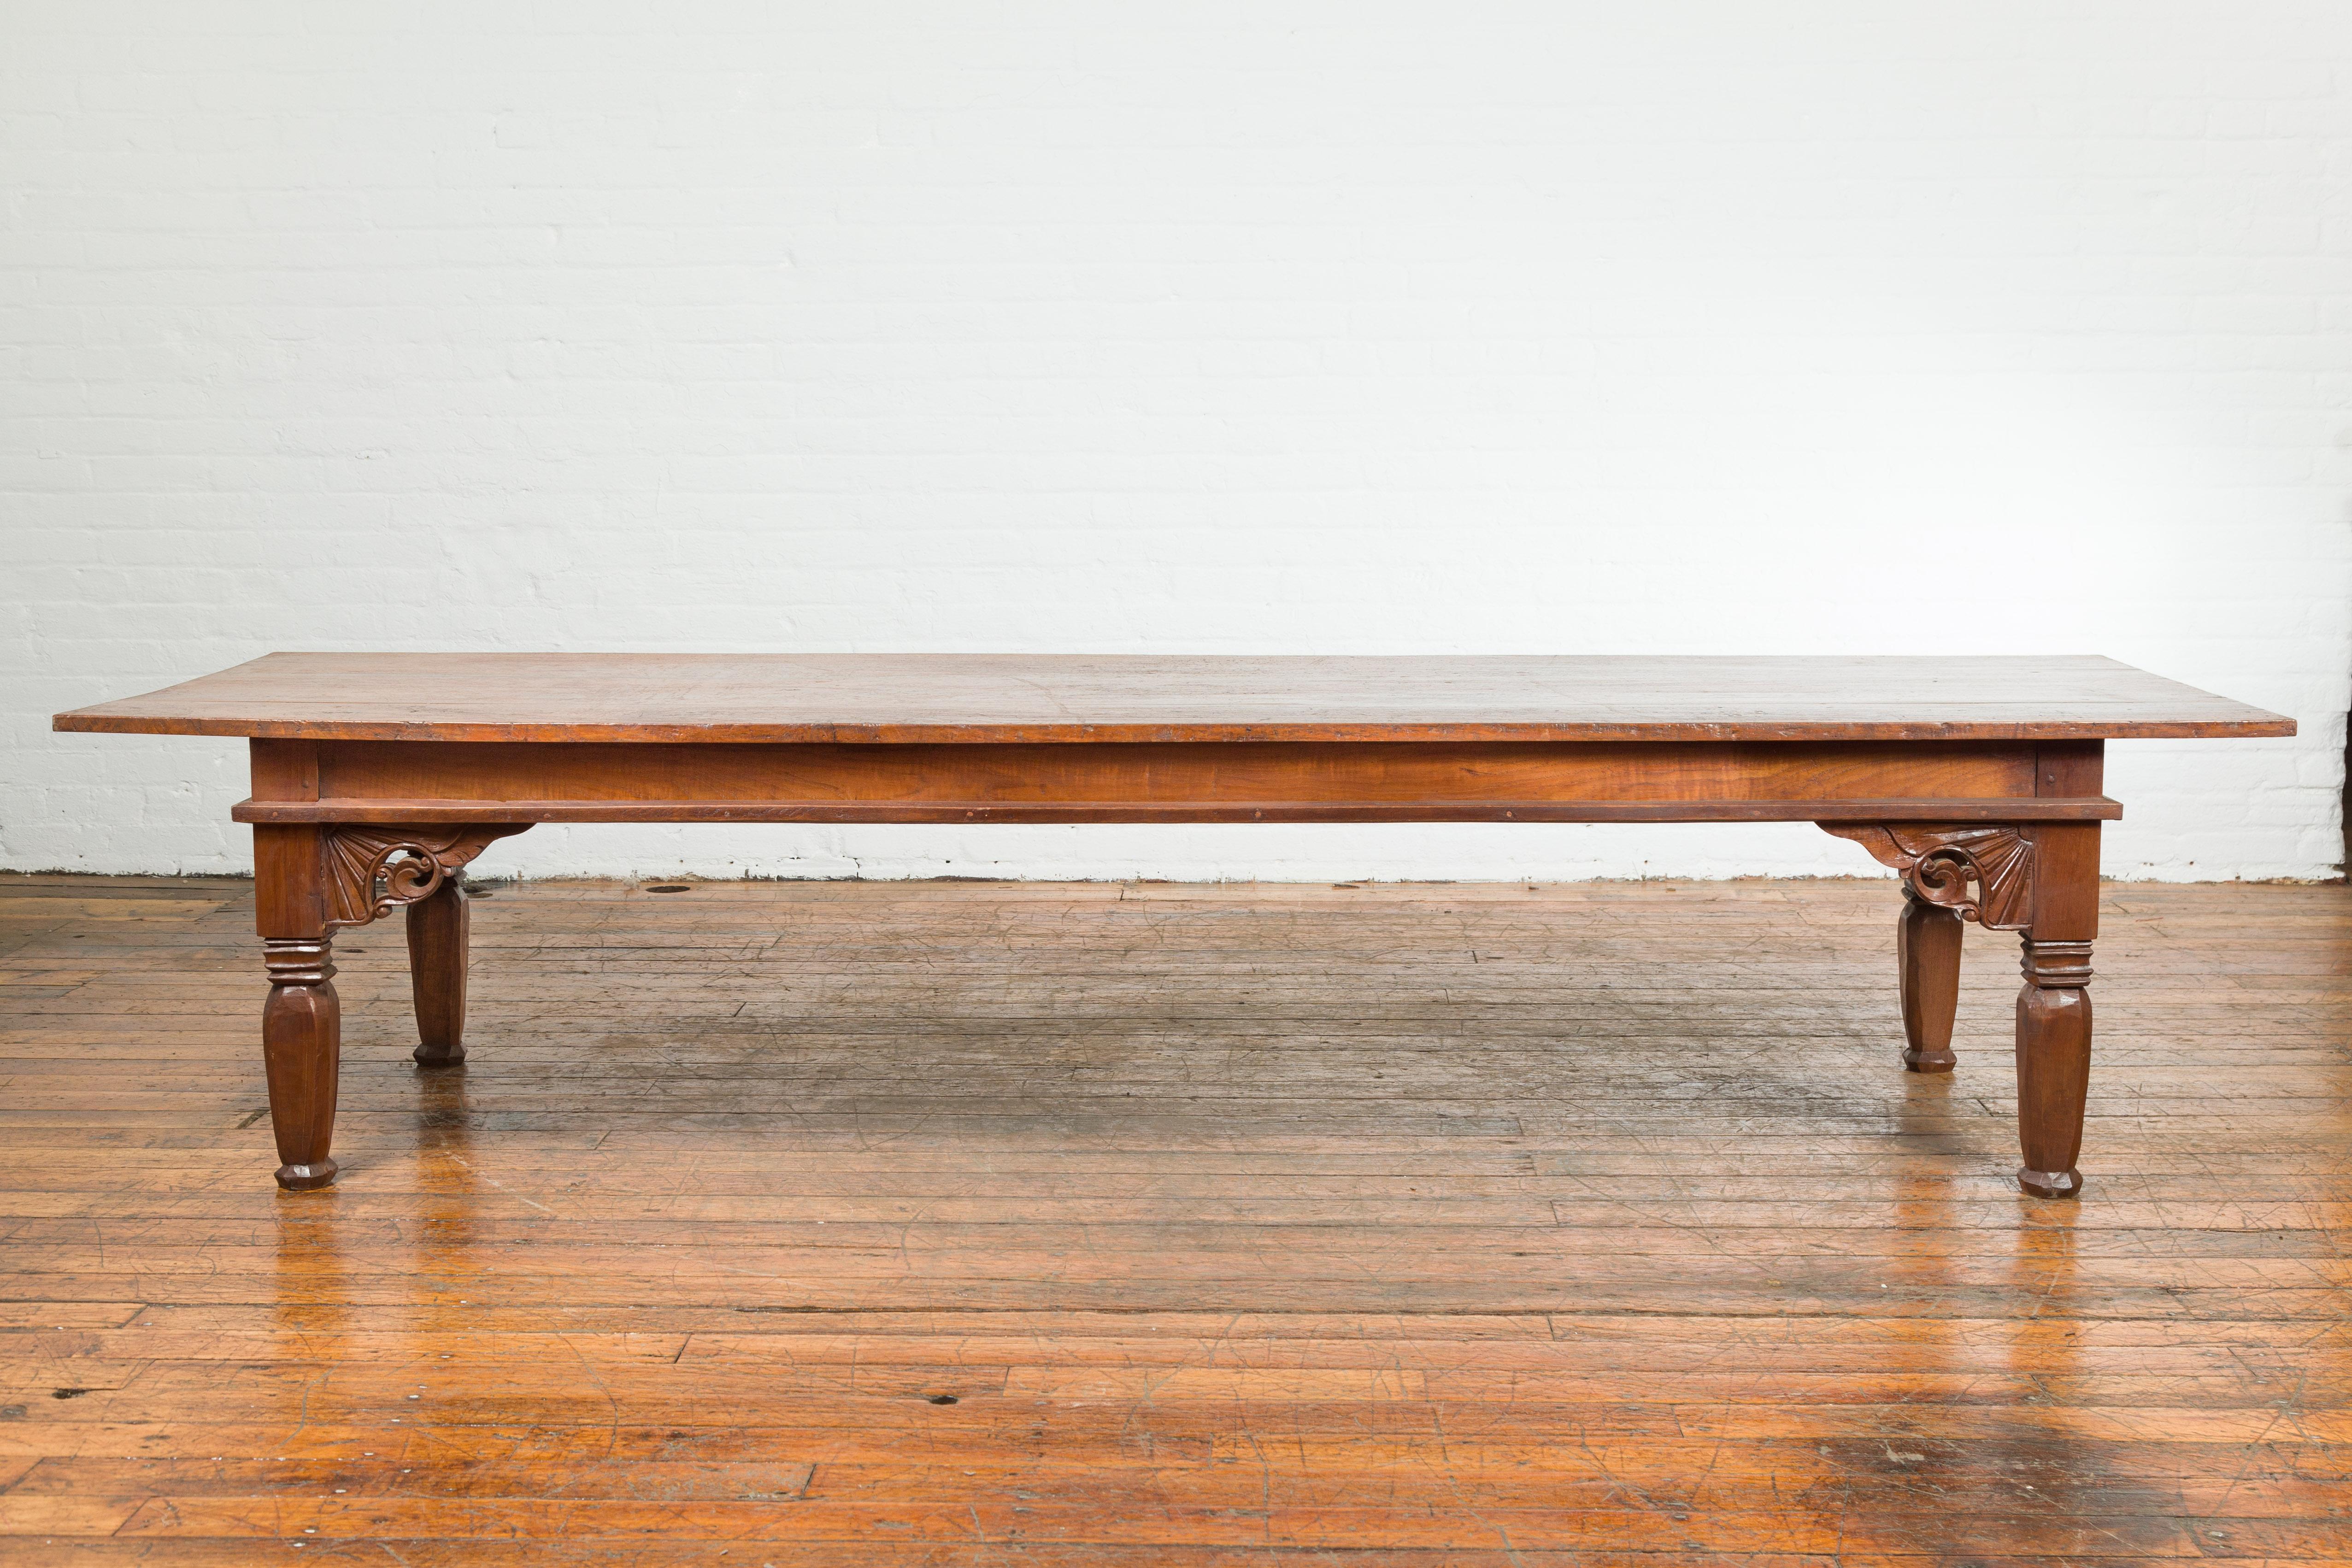 An antique 19th century Indonesian oversized coffee table from Madura, with carved spandrels. Created in Madura off of the northeastern coast of Java during the 19th century, this wooden coffee table features a rectangular planked top overhanging a